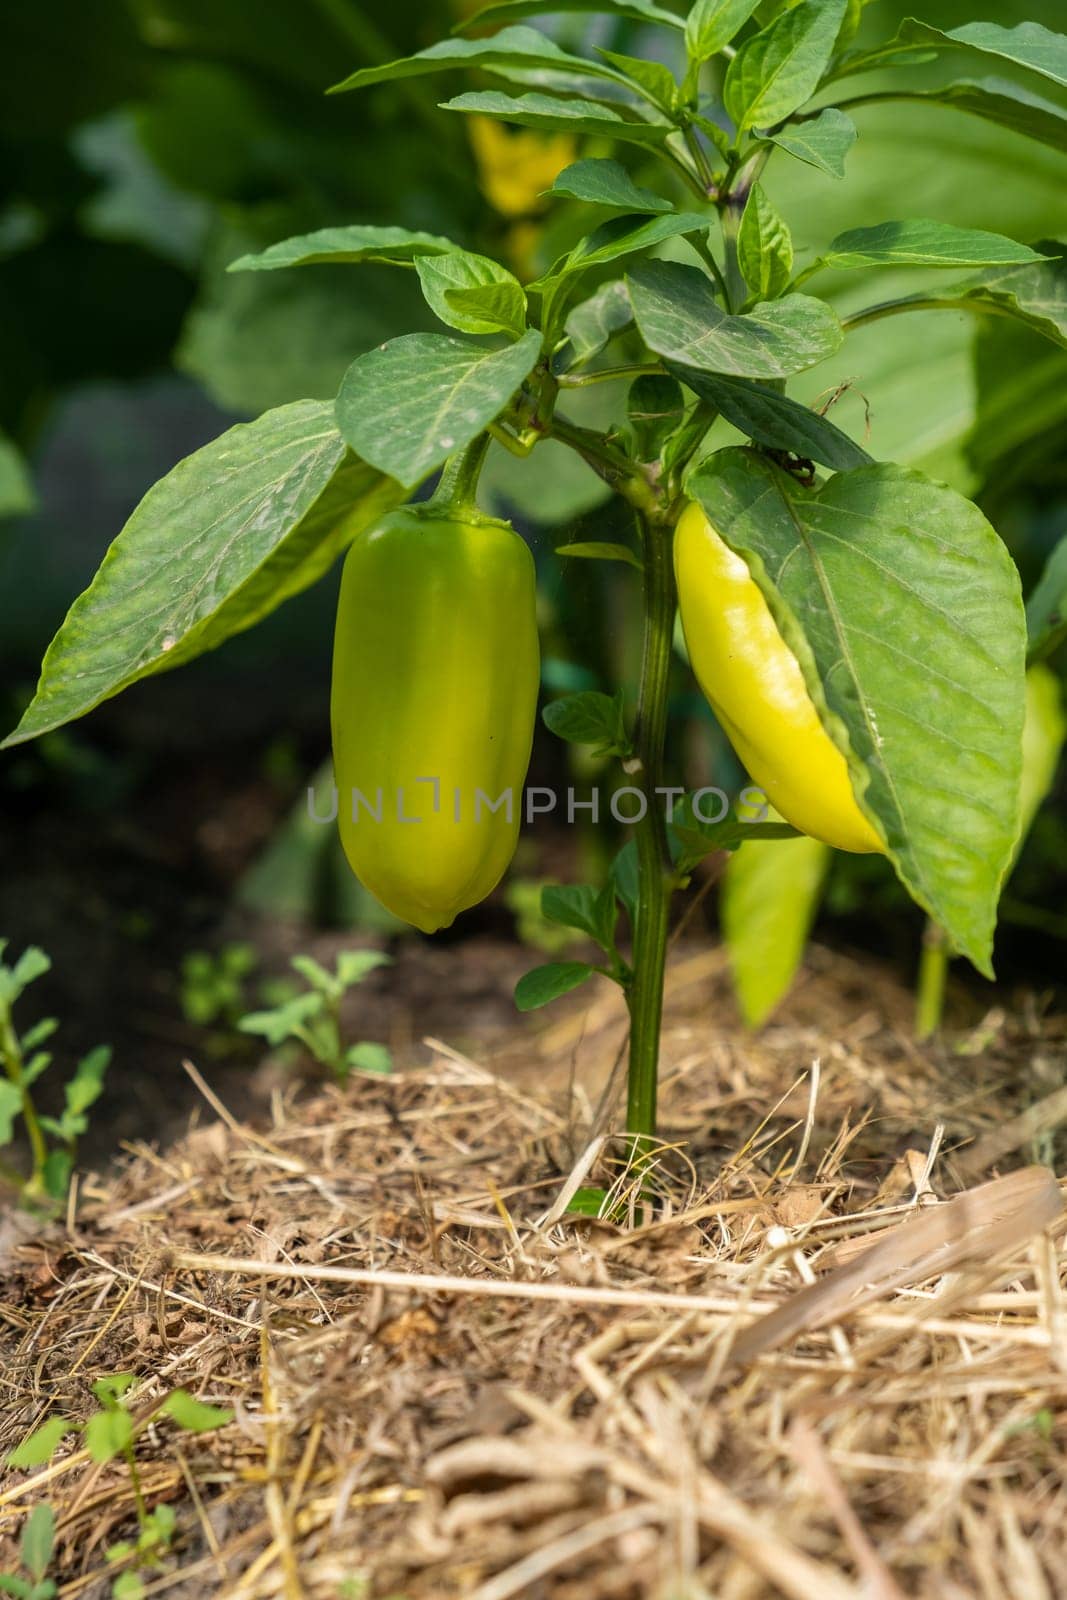 A lot of green peppers on a bush in a greenhouse. Peppers in a greenhouse. Plantation of green peppers. Organic farming, growth of young green hot peppers in a greenhouse.